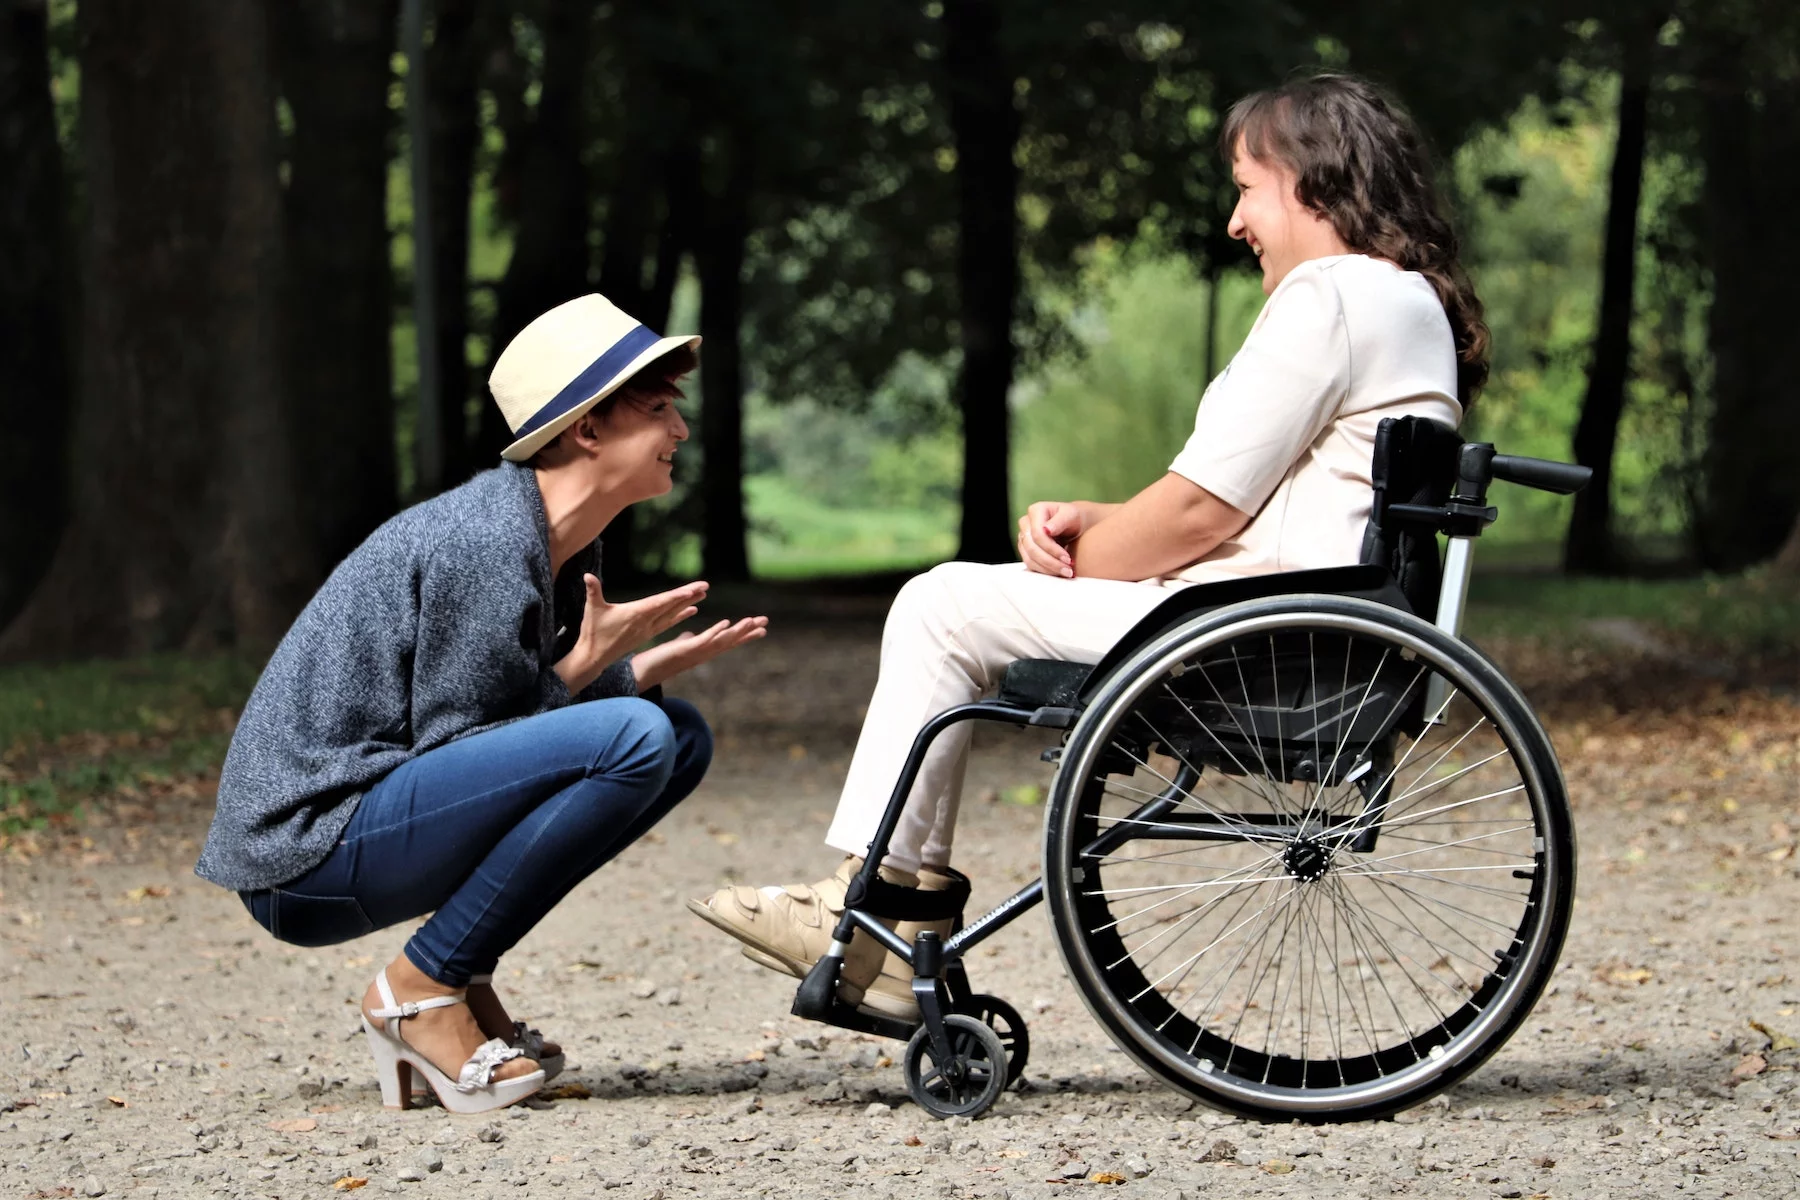 Person squats on the ground to talk to friend in a wheelchair, both are laughing